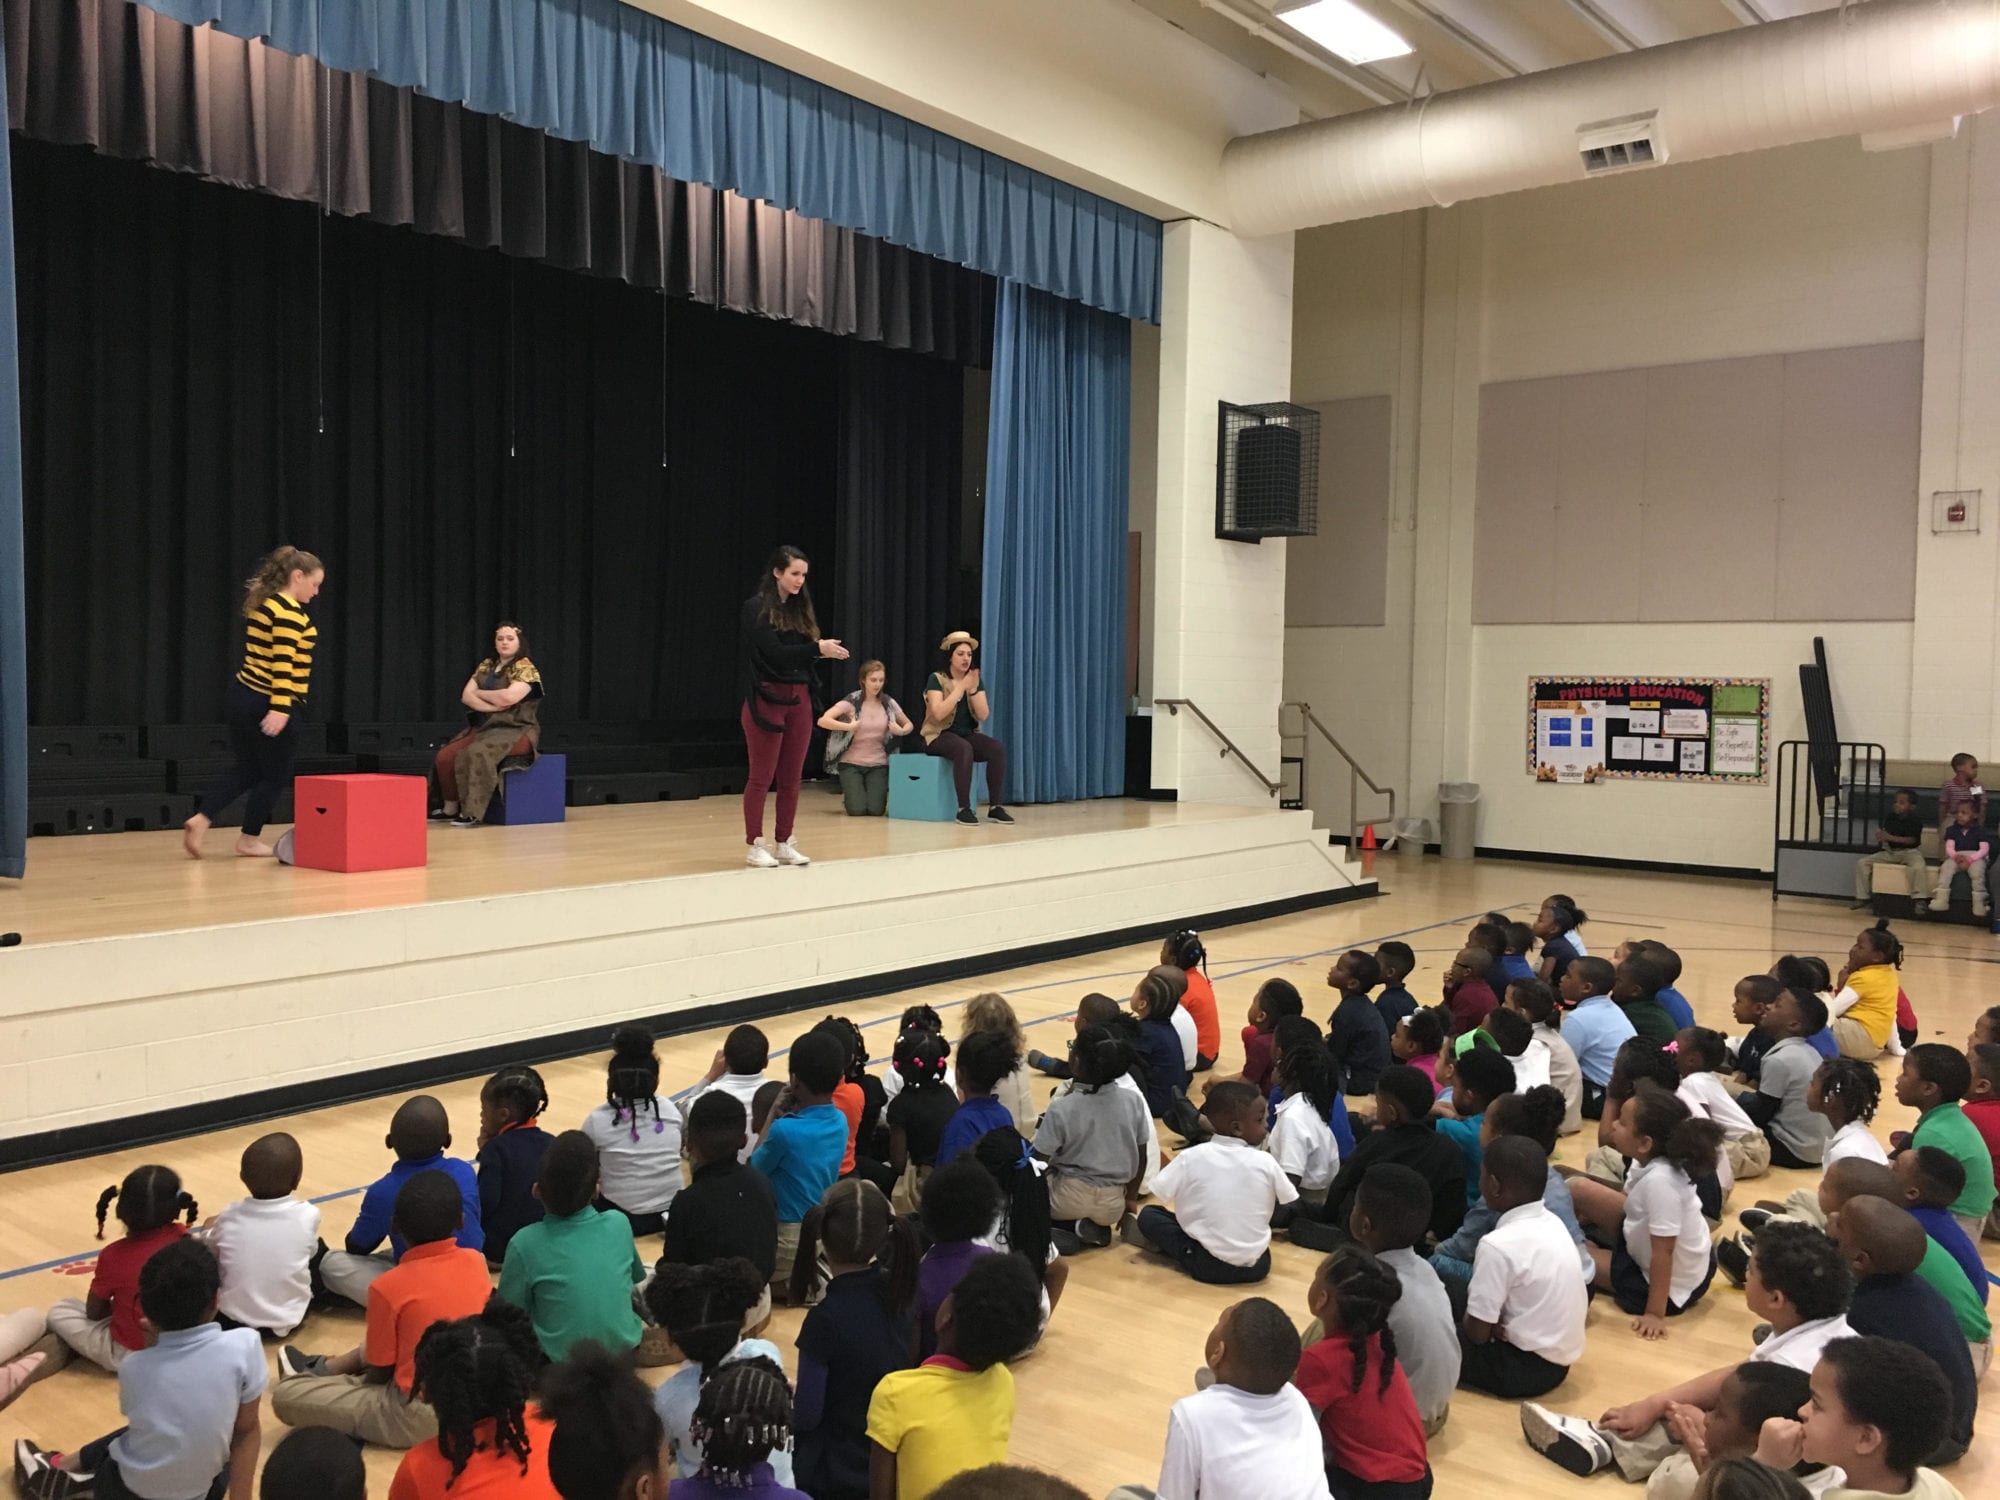 RepCo performing at local elementary school